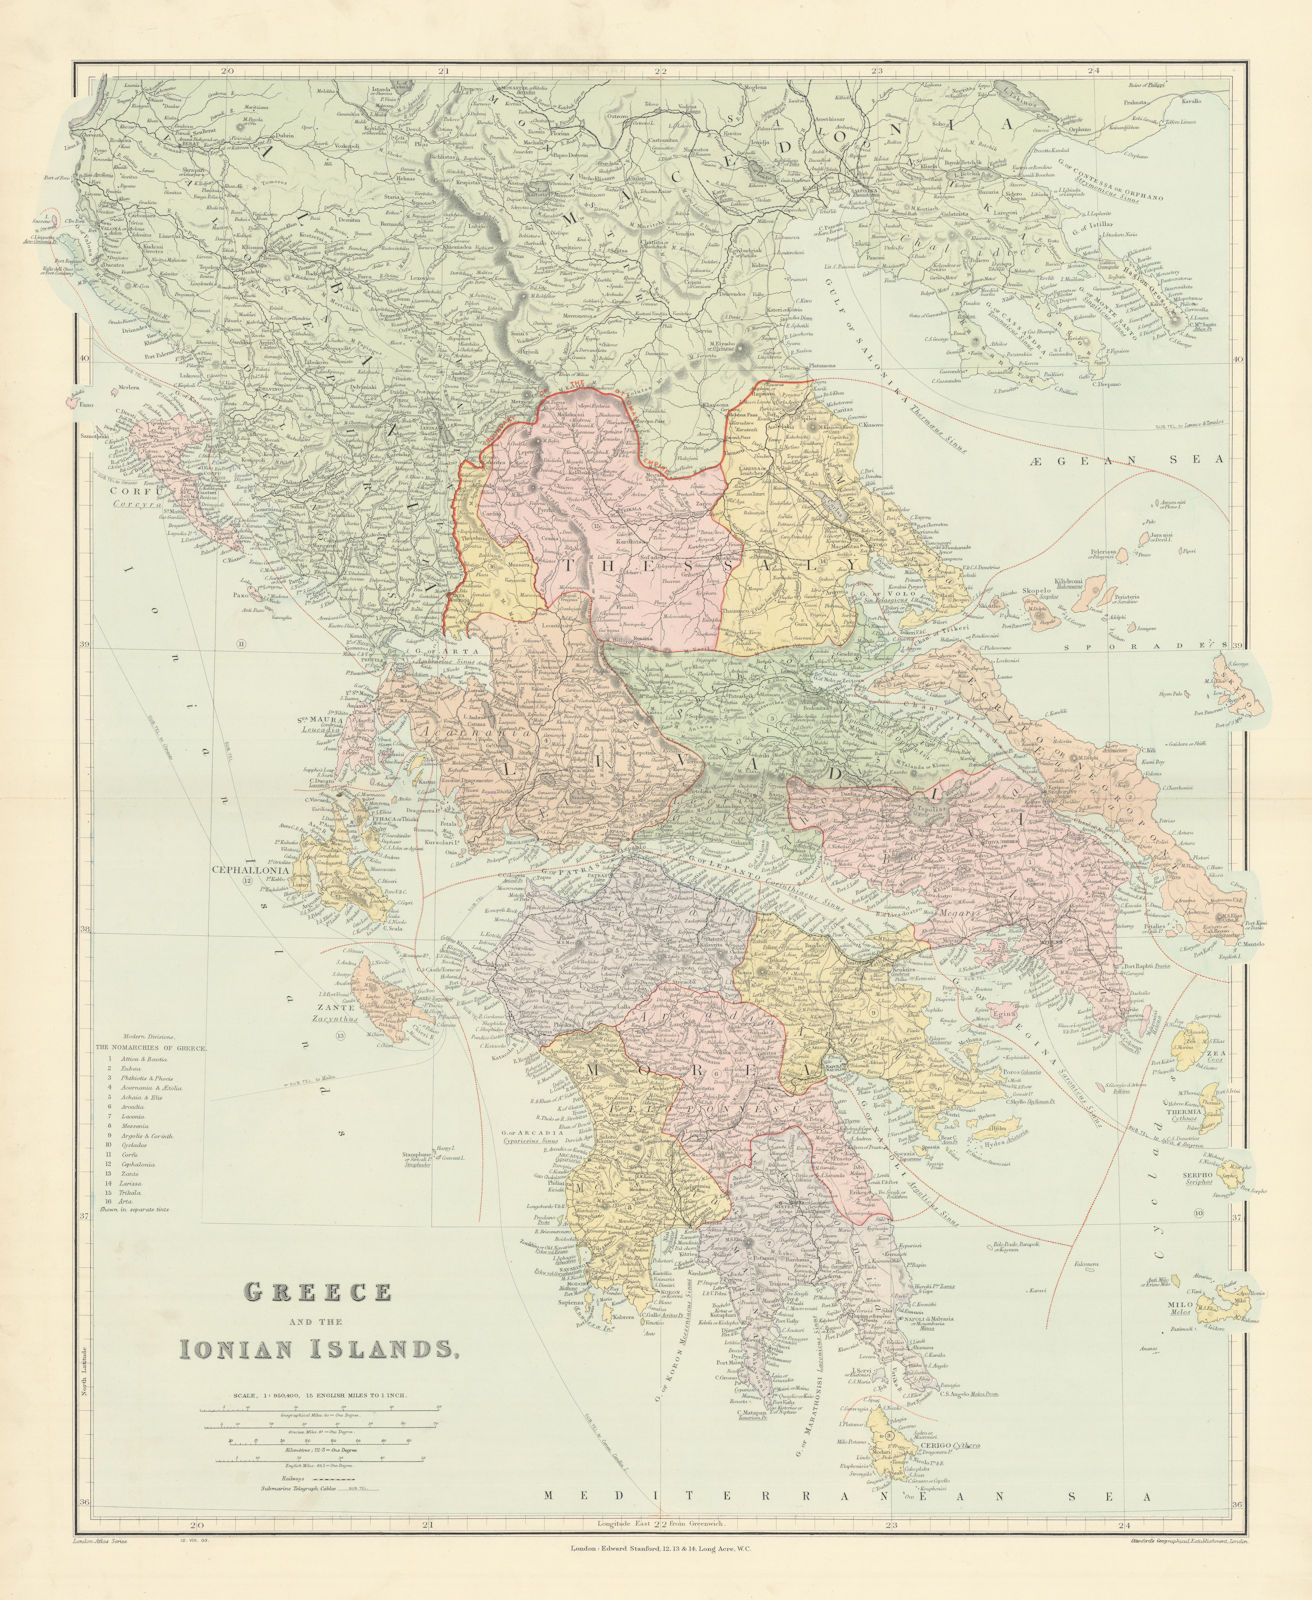 Associate Product Greece. Nomarchies. Ionian Sporades Cyclades Morea Livadia. STANFORD 1904 map